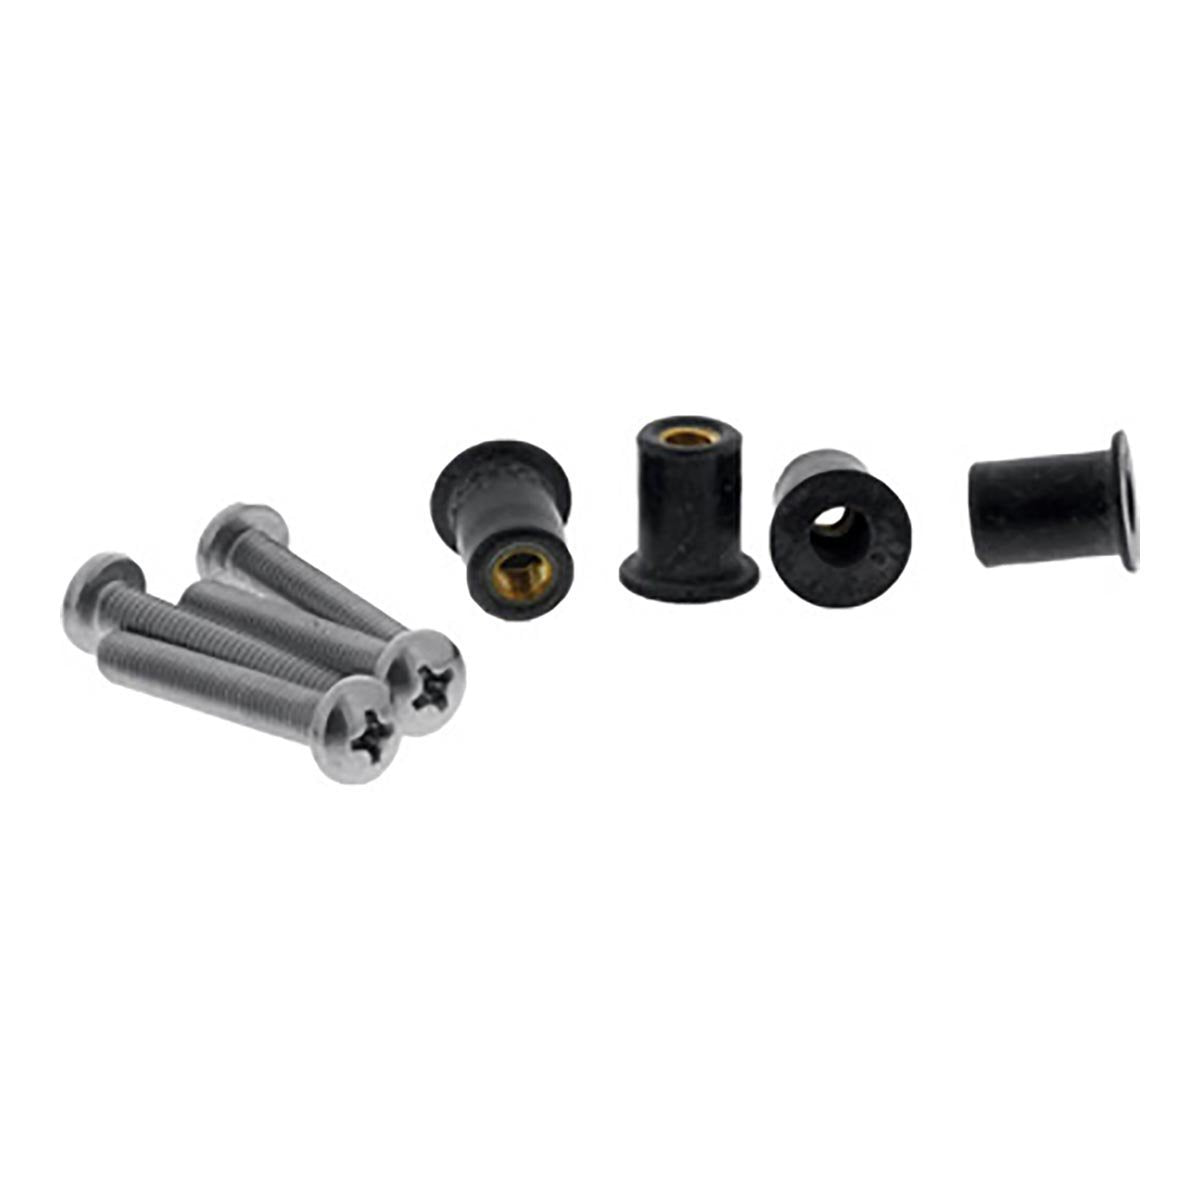 Scotty Well Nut Kit - 16 Pack